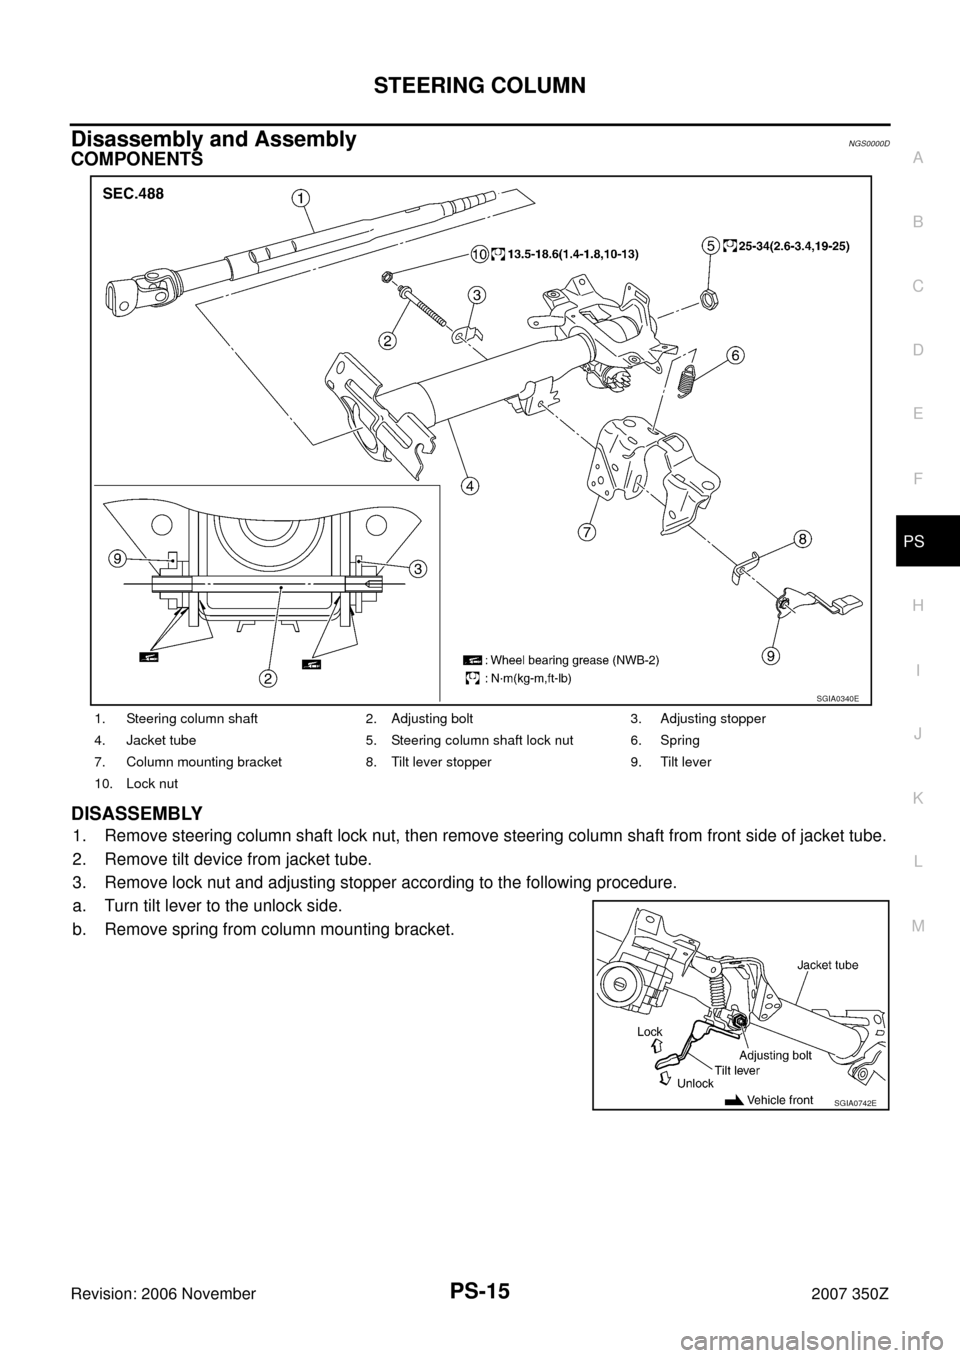 NISSAN 350Z 2007 Z33 Power Steering System Workshop Manual STEERING COLUMN
PS-15
C
D
E
F
H
I
J
K
L
MA
B
PS
Revision: 2006 November2007 350Z
Disassembly and AssemblyNGS0000D
COMPONENTS
DISASSEMBLY
1. Remove steering column shaft lock nut, then remove steering 